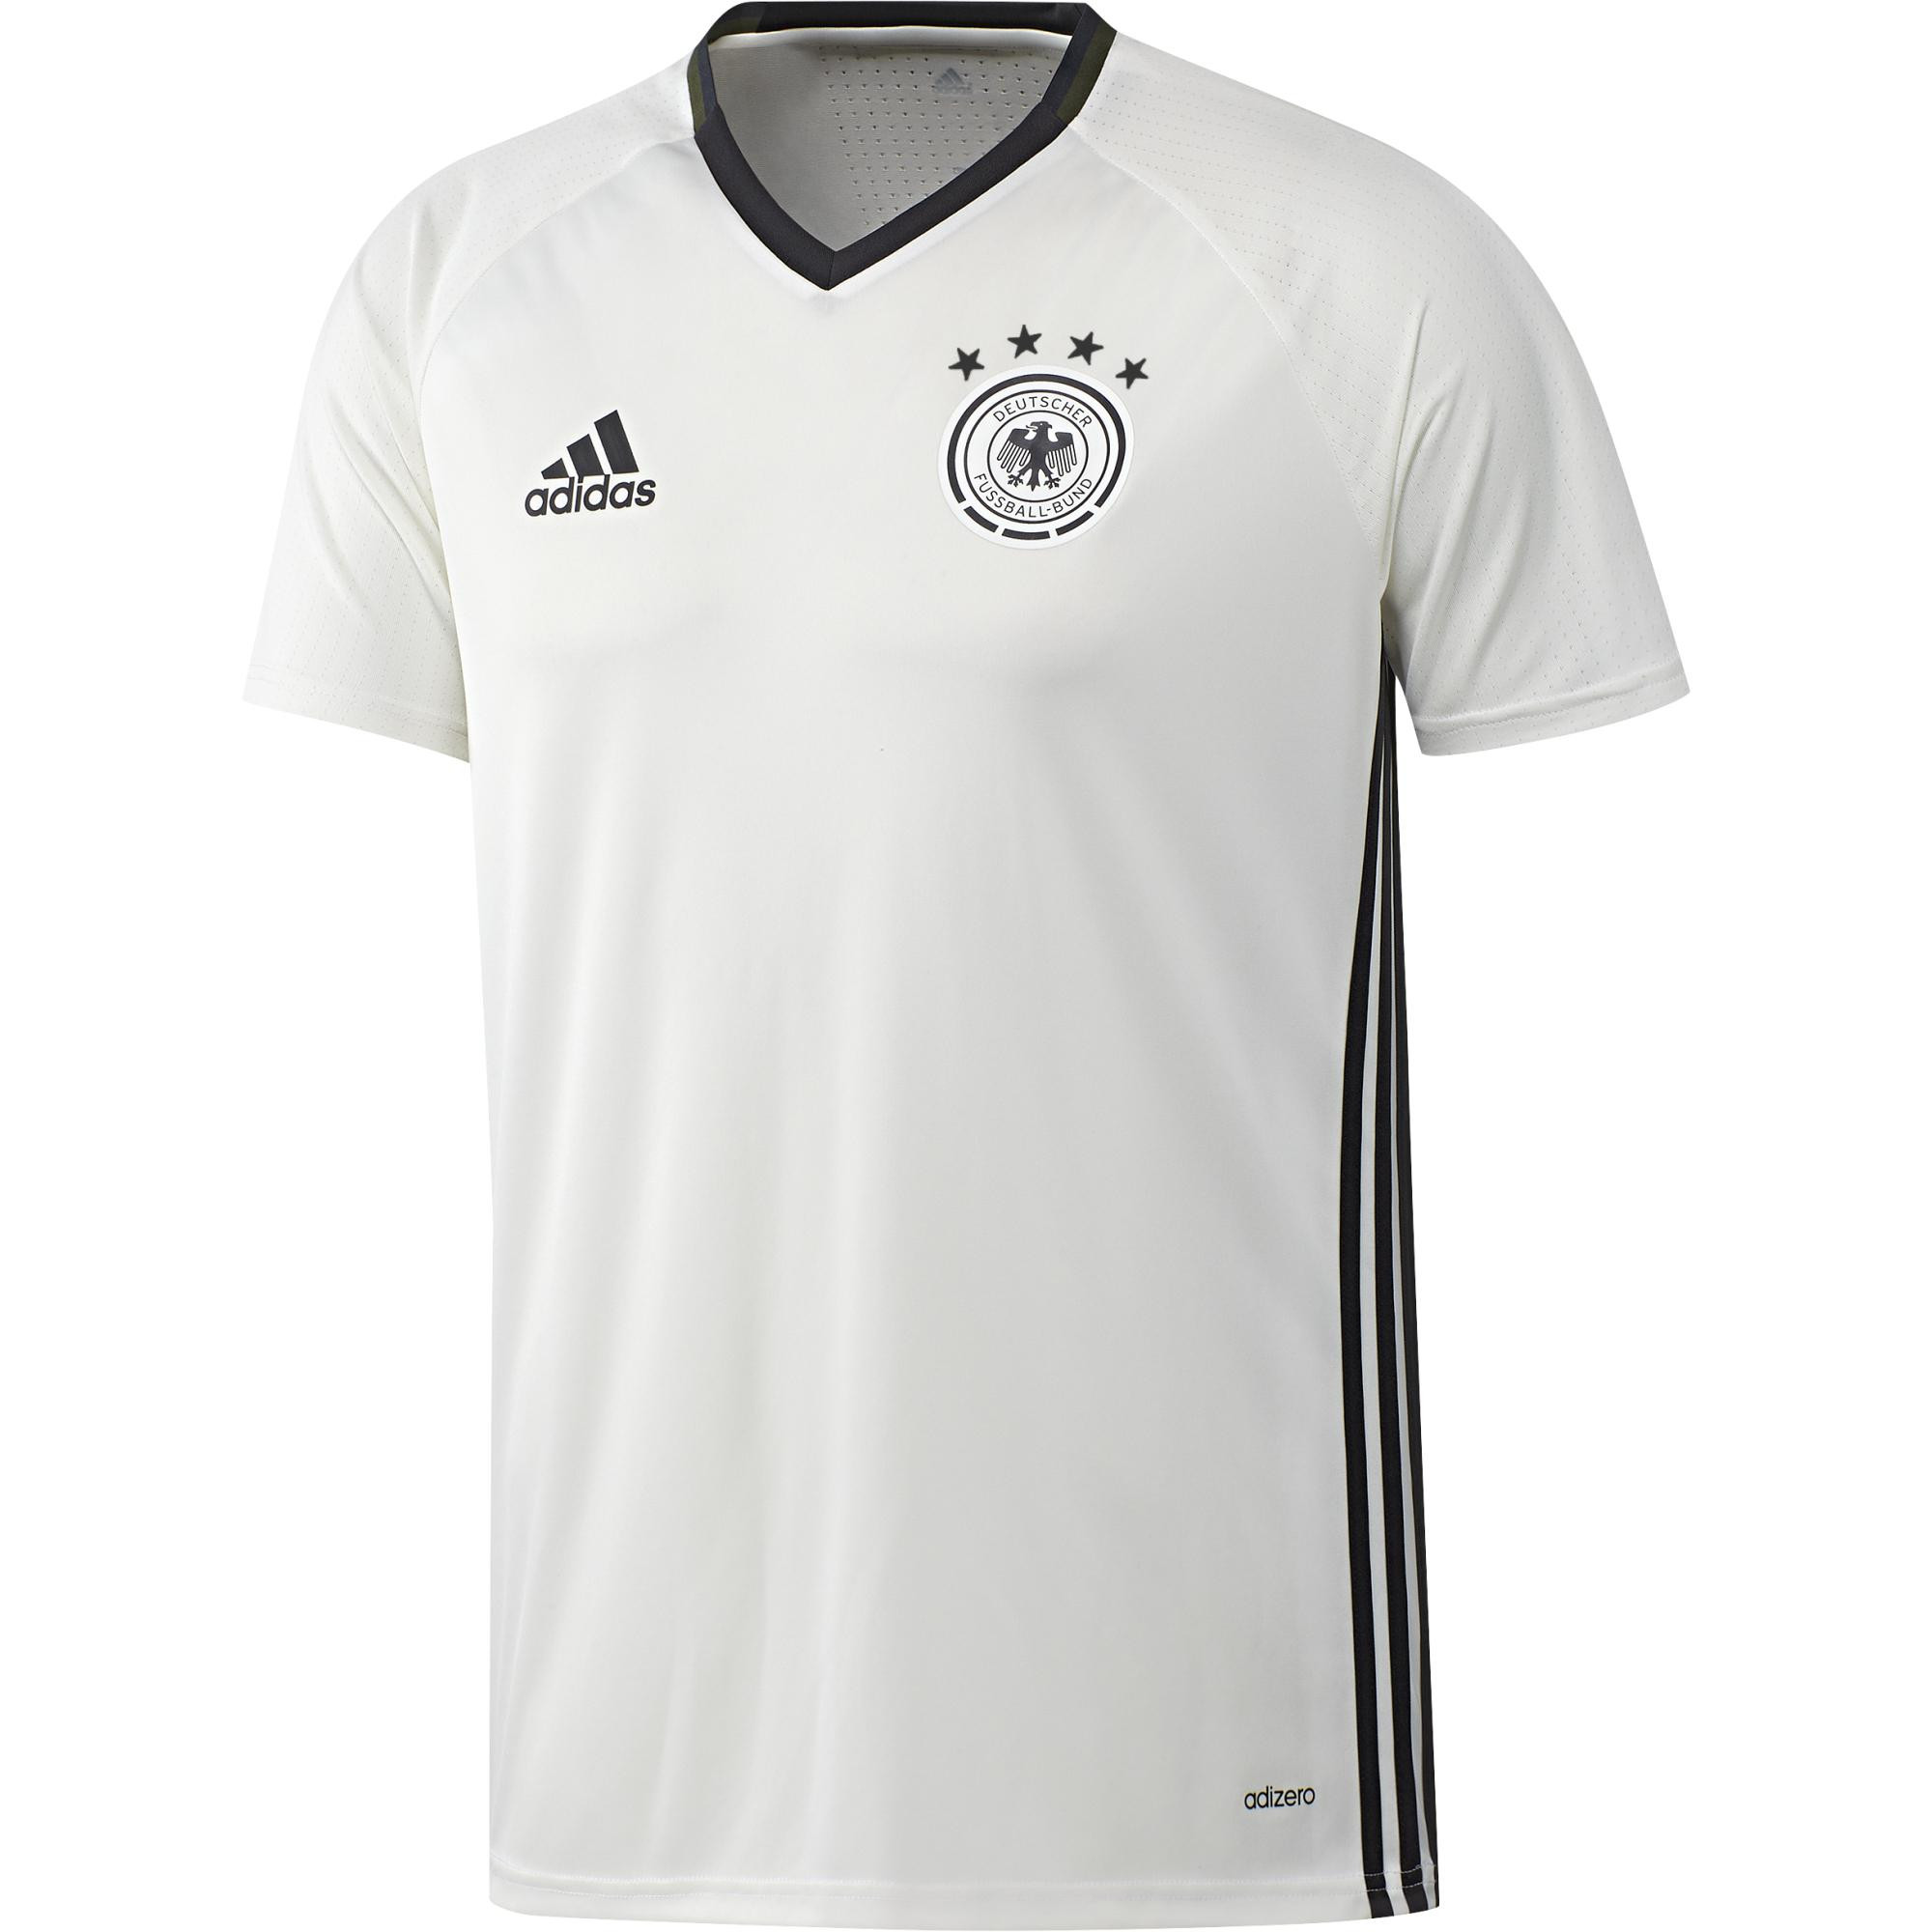 ADIDAS ALLEMAGNE MAILLOT ENTRAINEMENT BLANC 2016